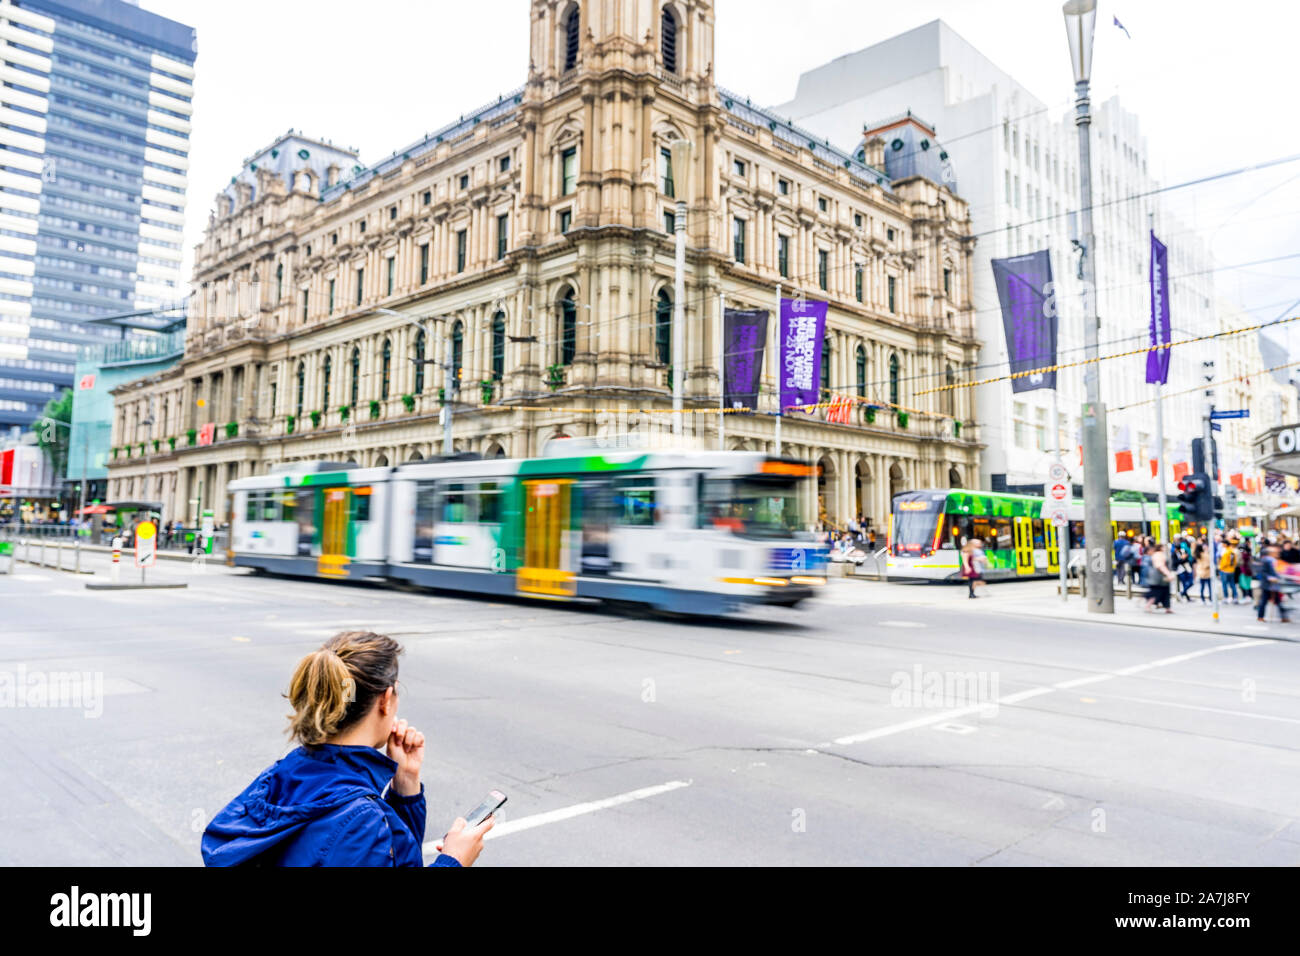 03 Nov 19. A tram passes along a busy intersection in the city of Melbourne, Victoria, Australia. Stock Photo